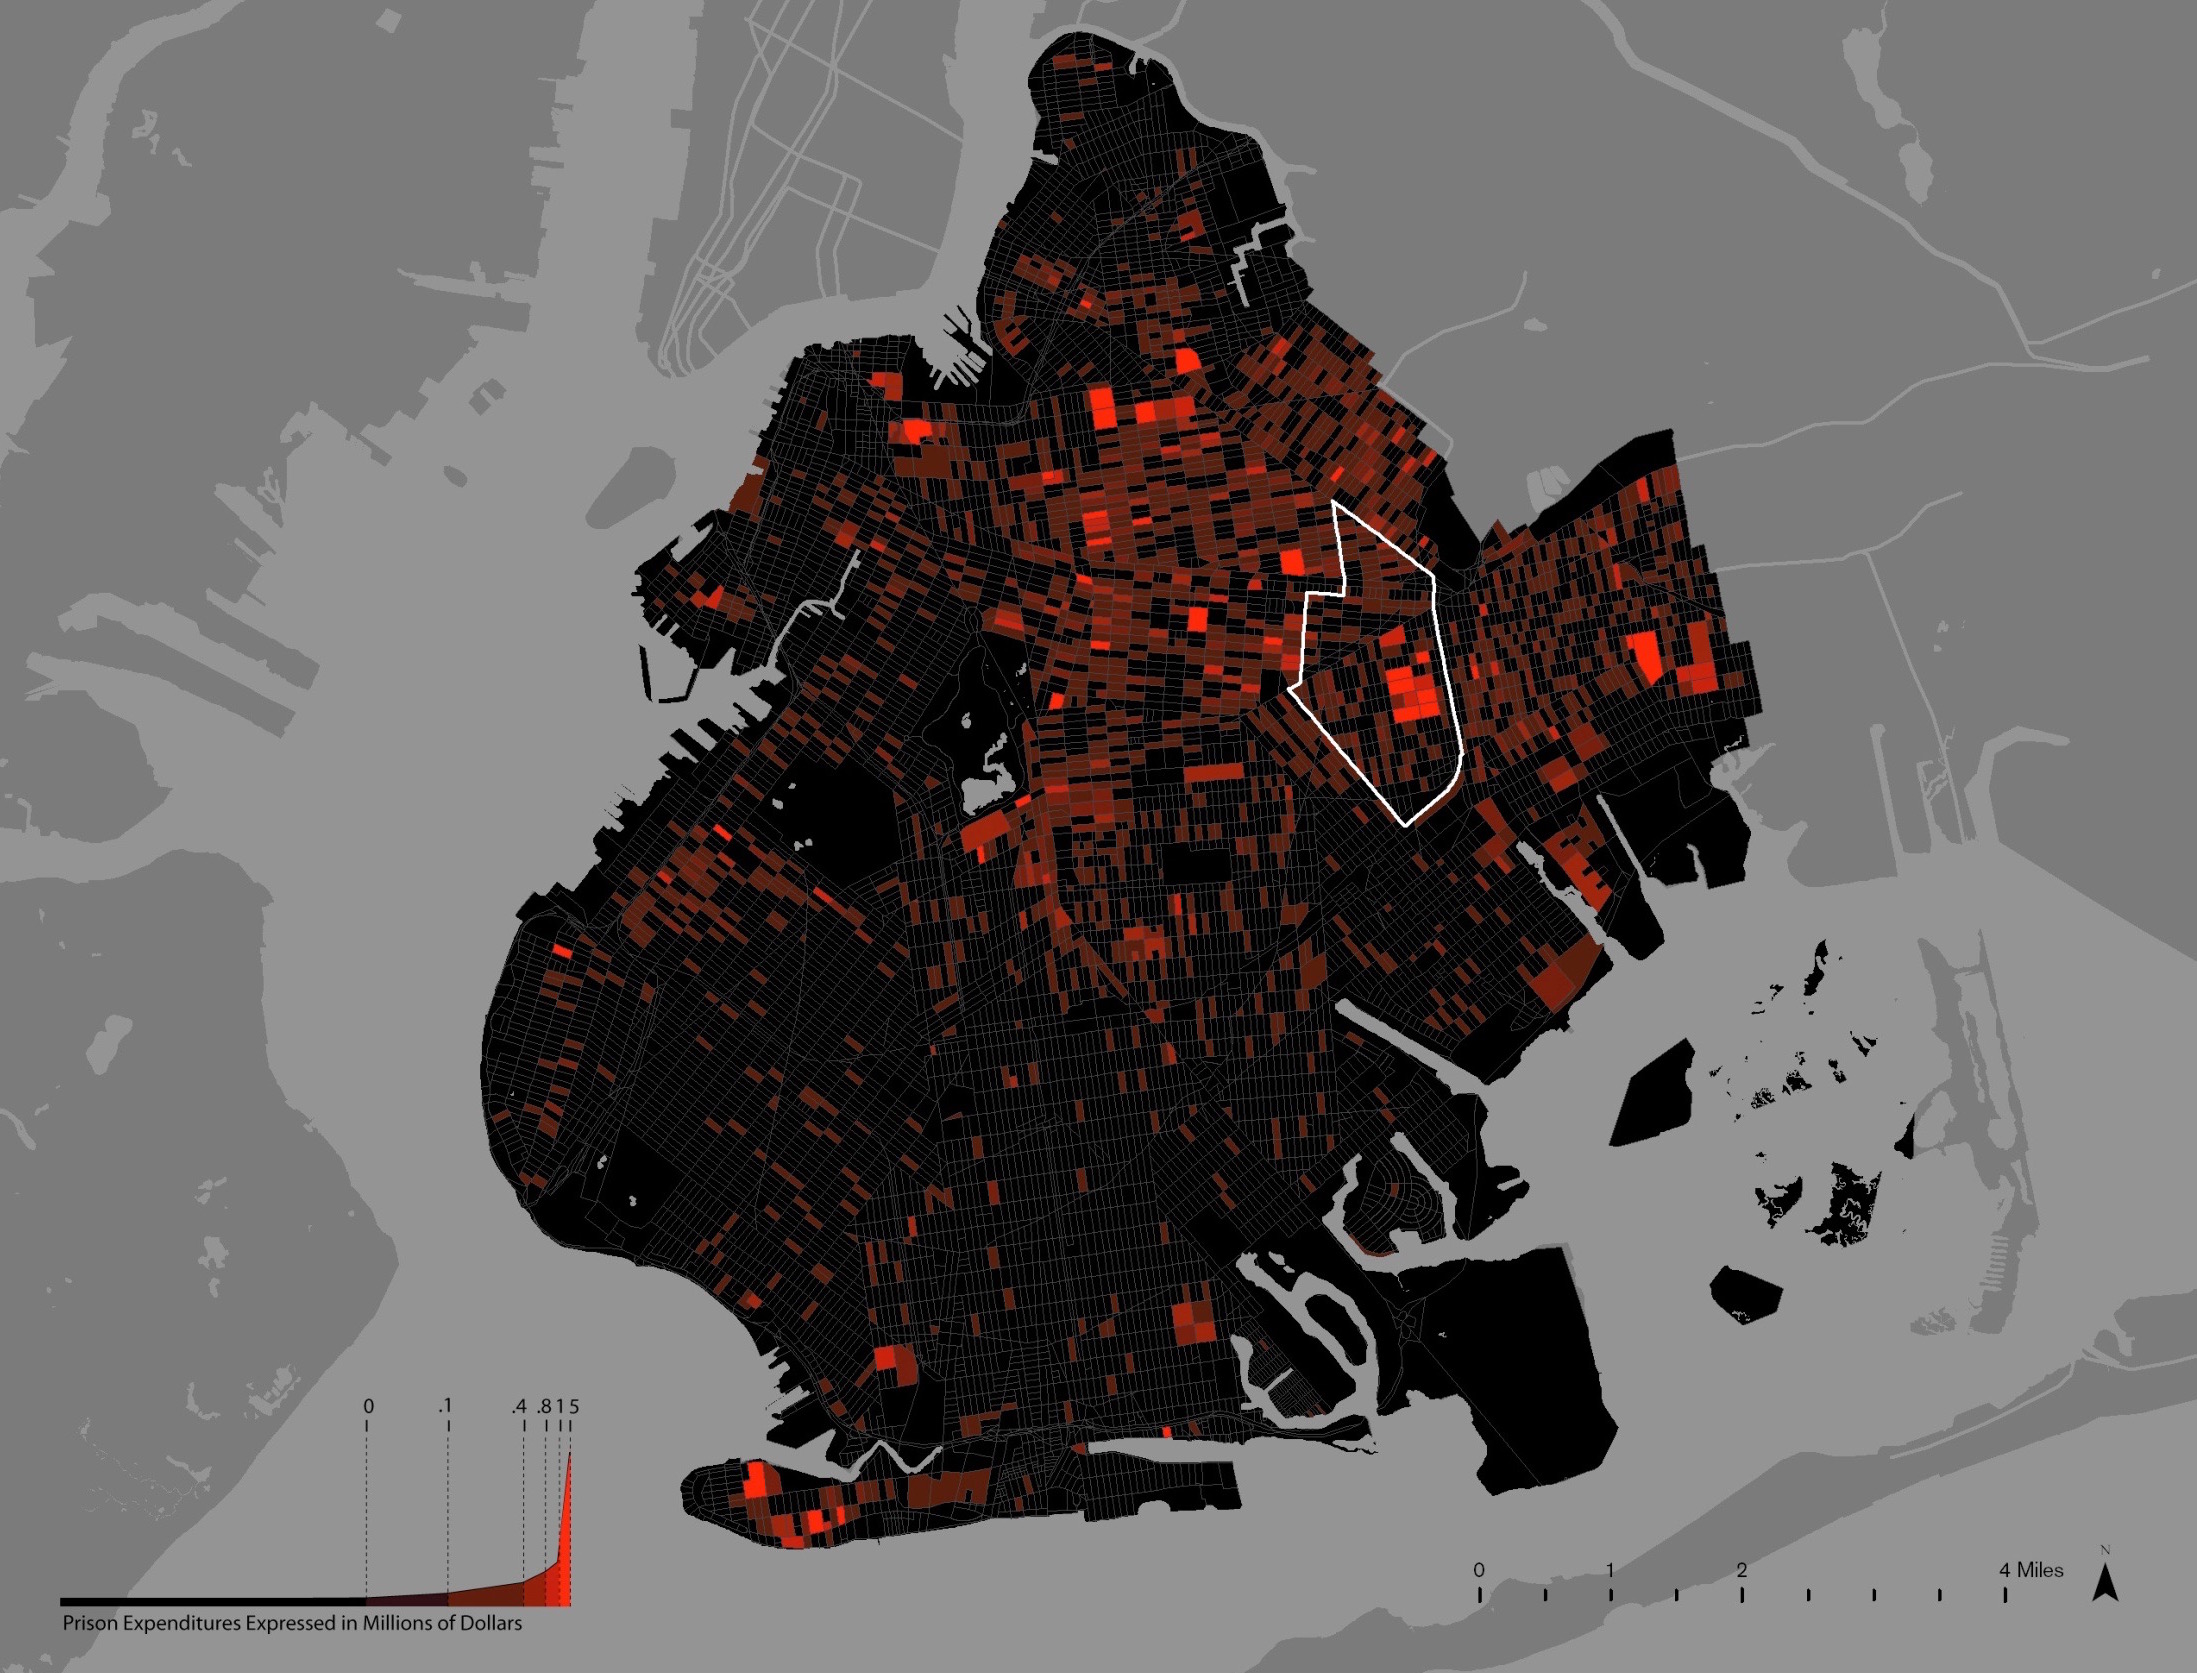 Community District 16 has 3.5% of Brooklyn's population but 8.5% of its prision admissions.